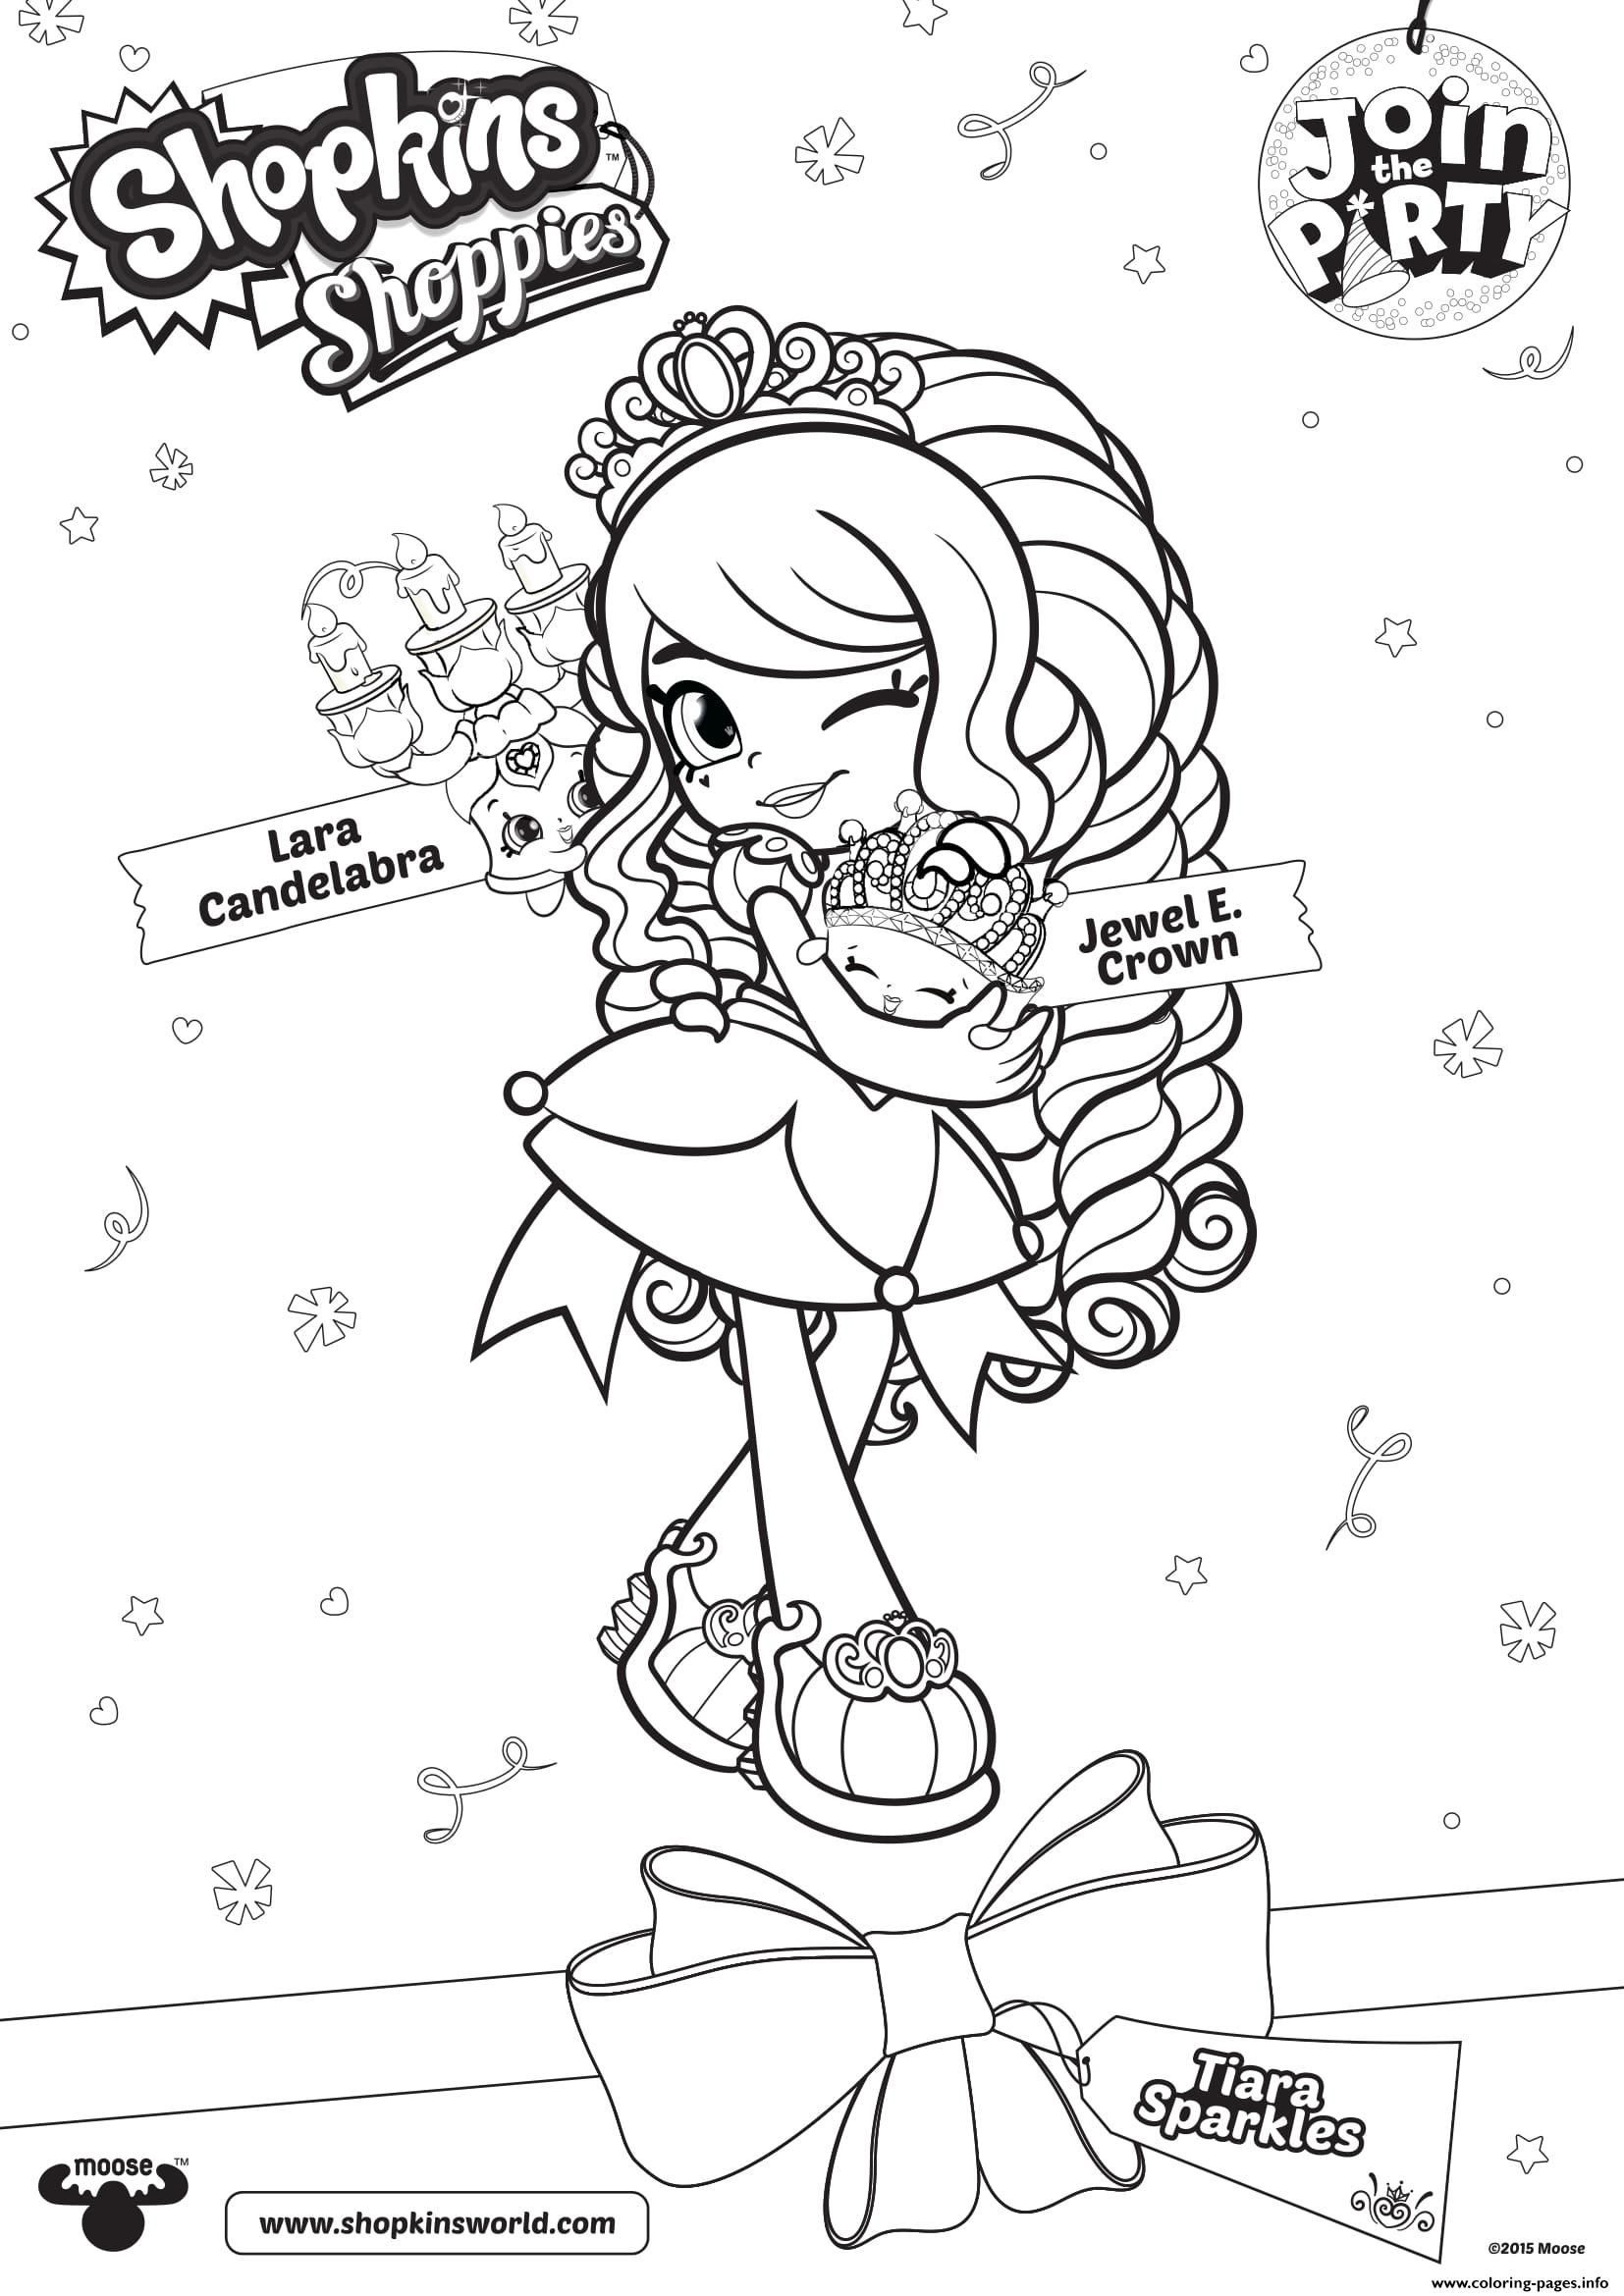 Shopkins Shoppies Join The Party Lara Candelabra Jewel Crown coloring